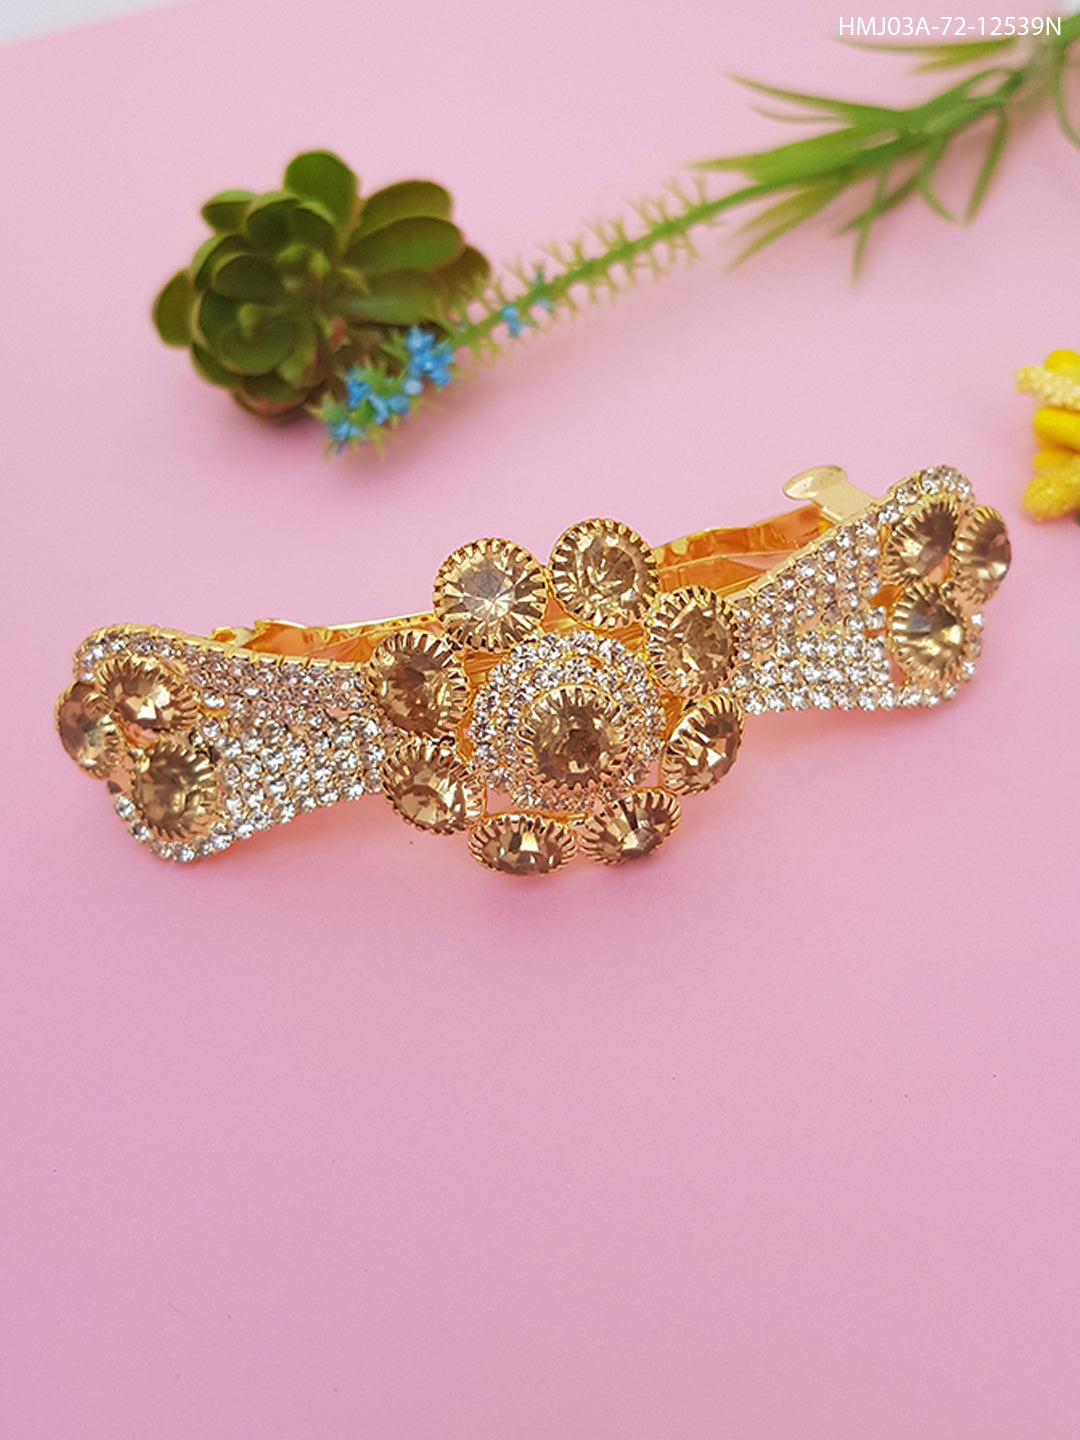 Designer Hair Clips with CZ stones 12539N